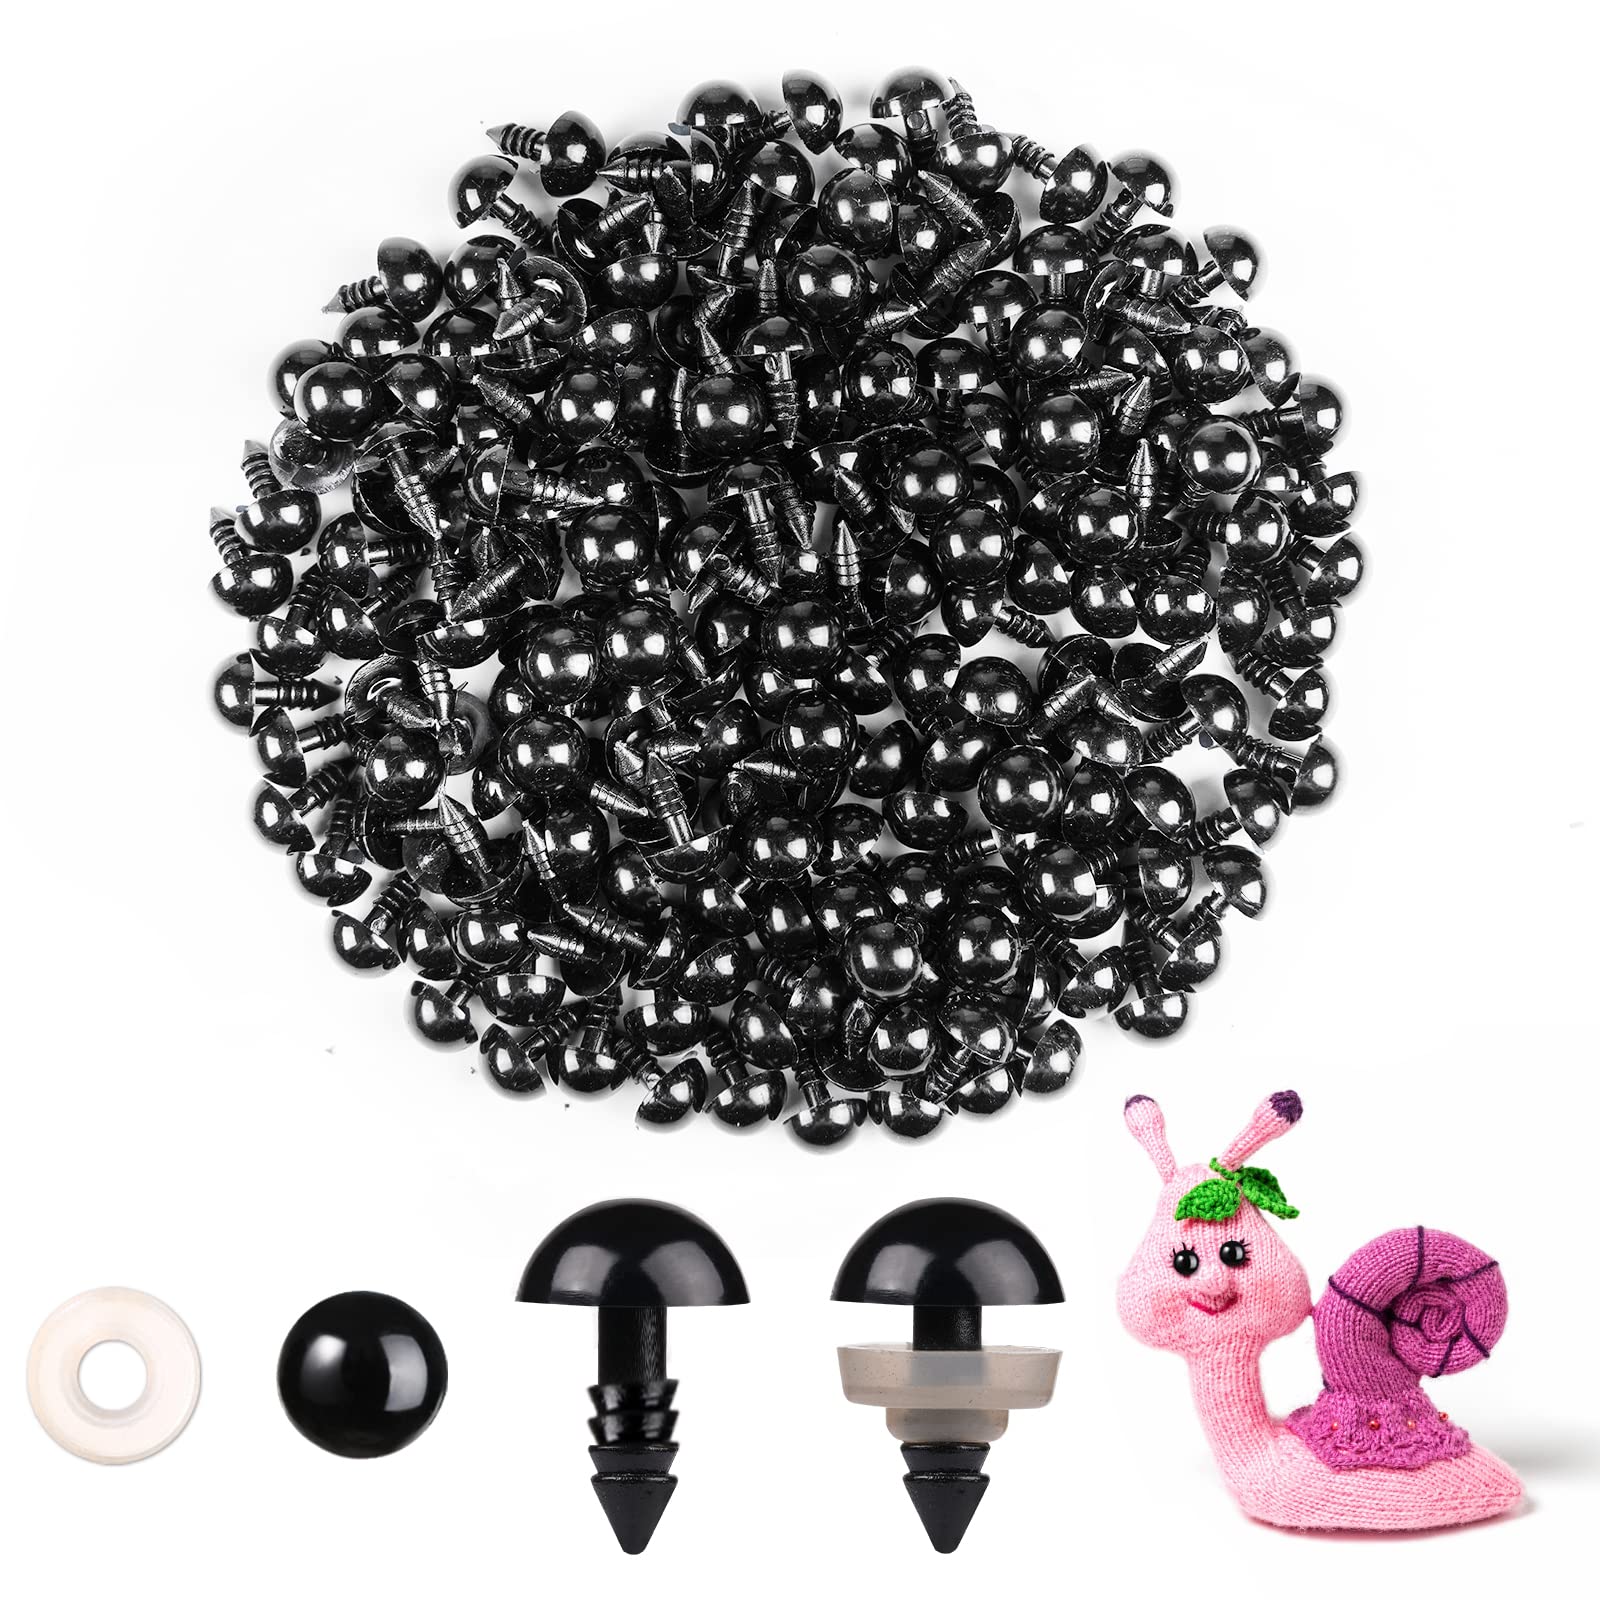 mucunnia MUCUNNIA 200pcs 10mm Safety Eyes for Amigurumi with Washers  Plastic Black Safety Eyes for Crochet Craft Safety Eyes for DIY Hall